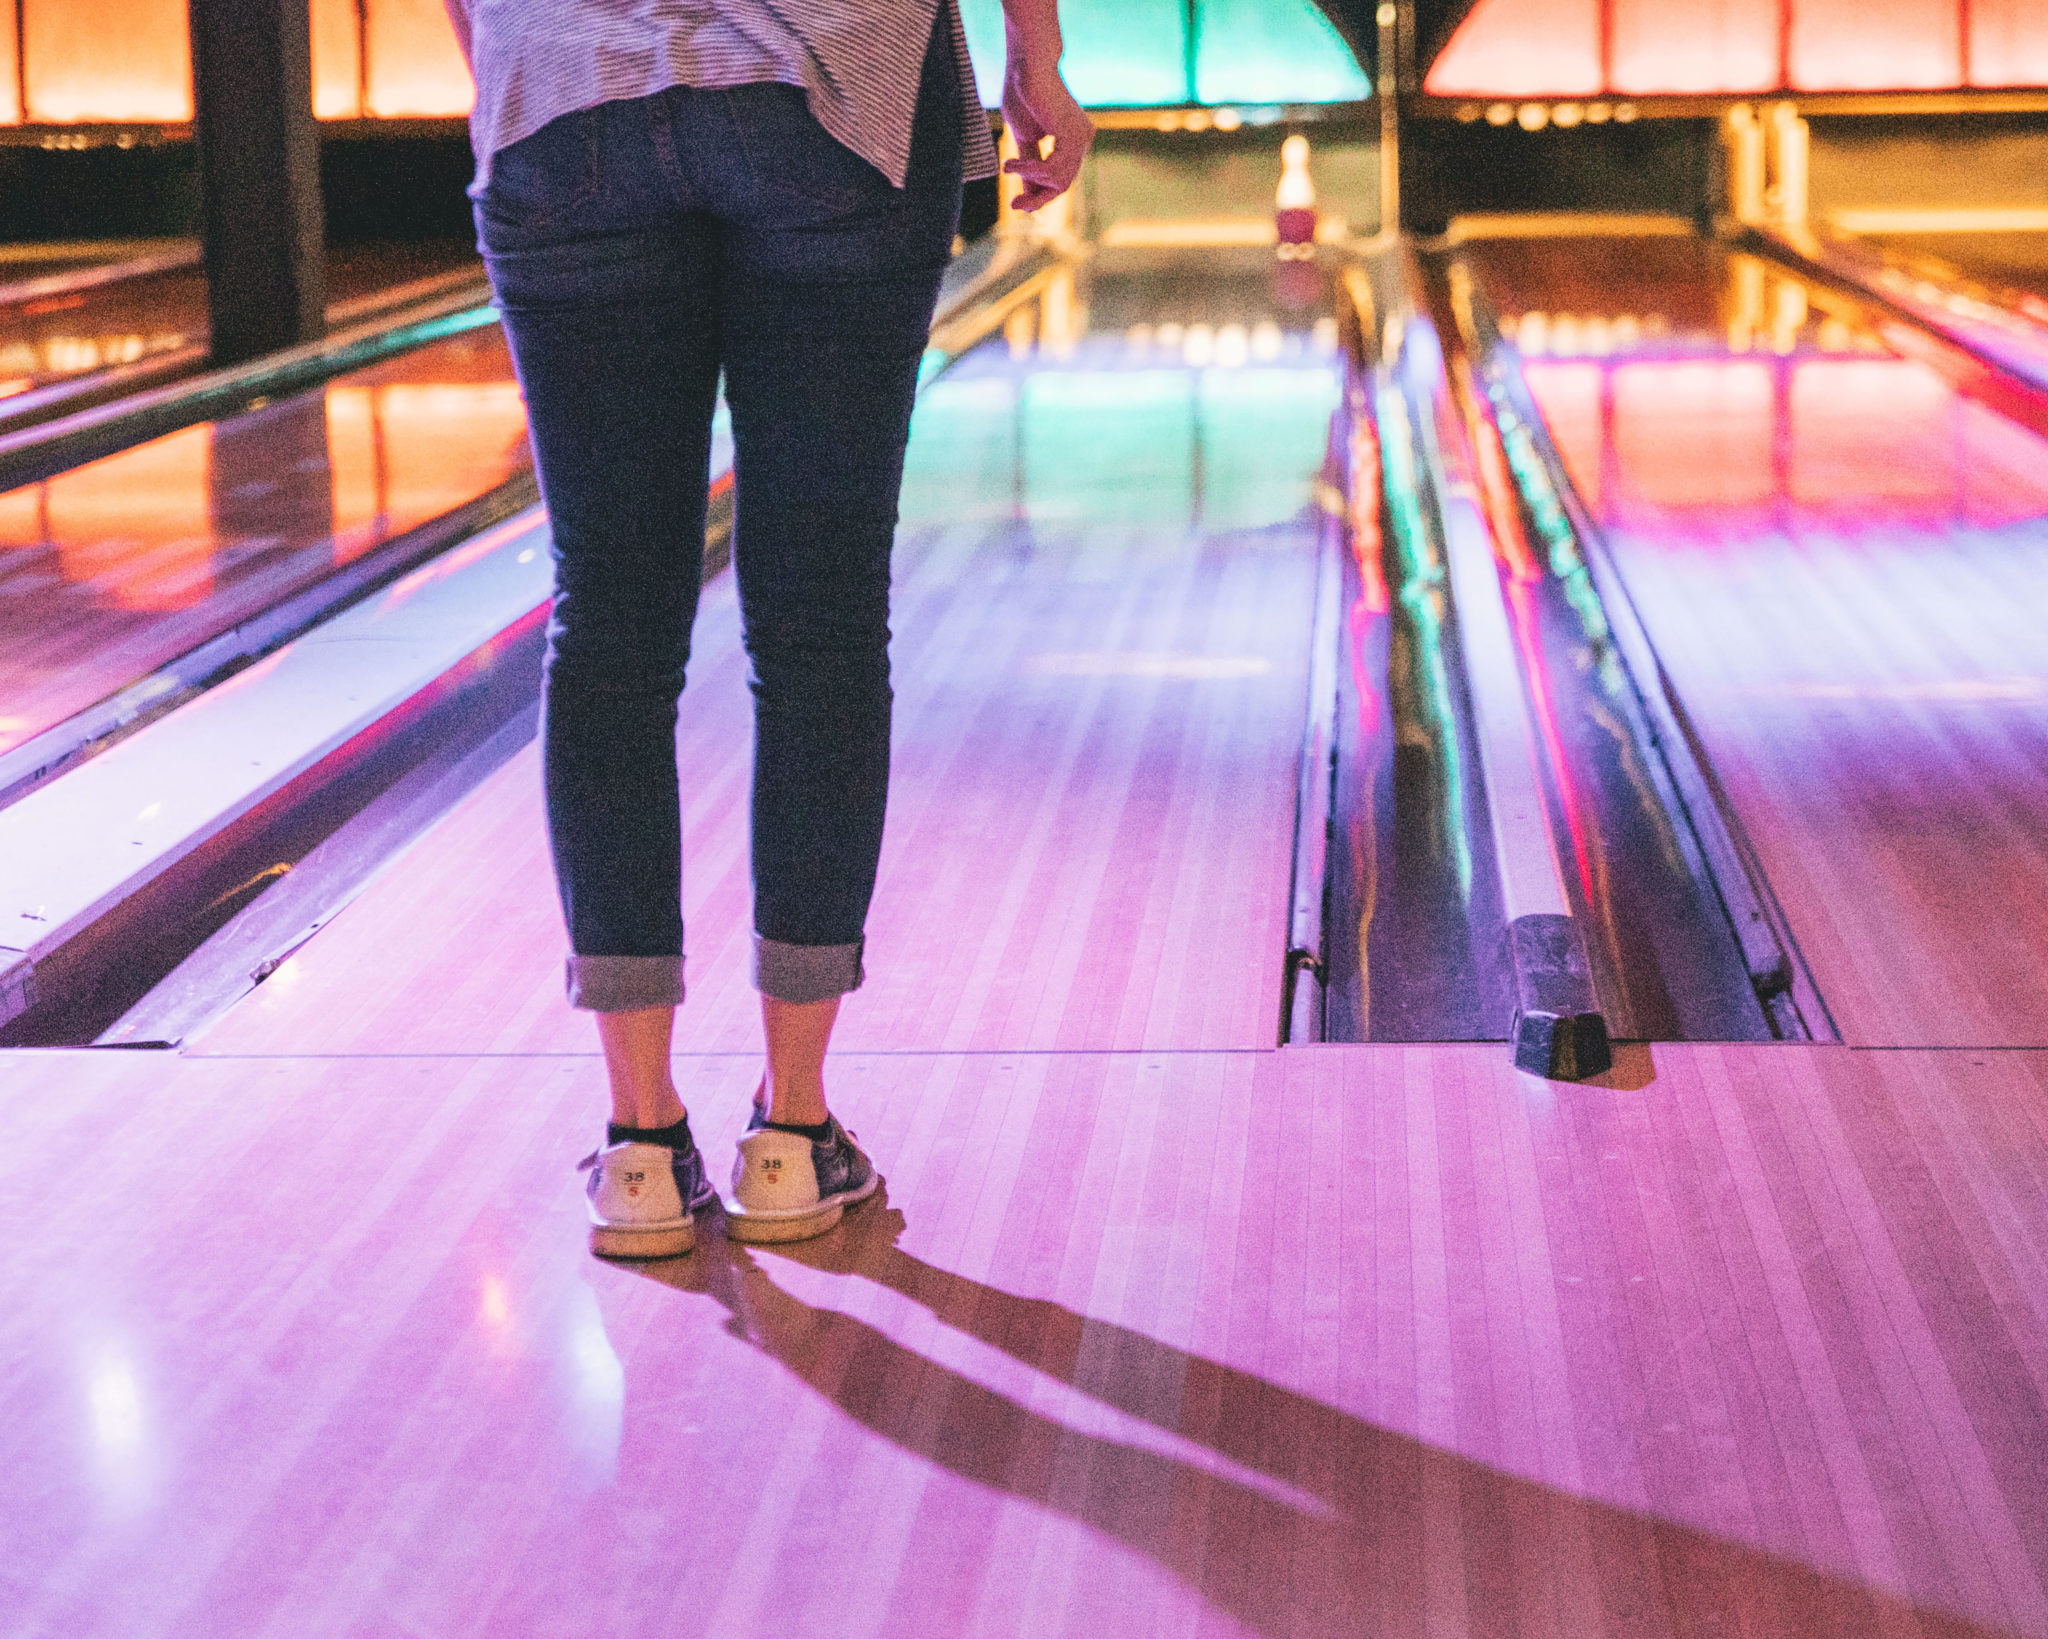 Woman at a bowling alley